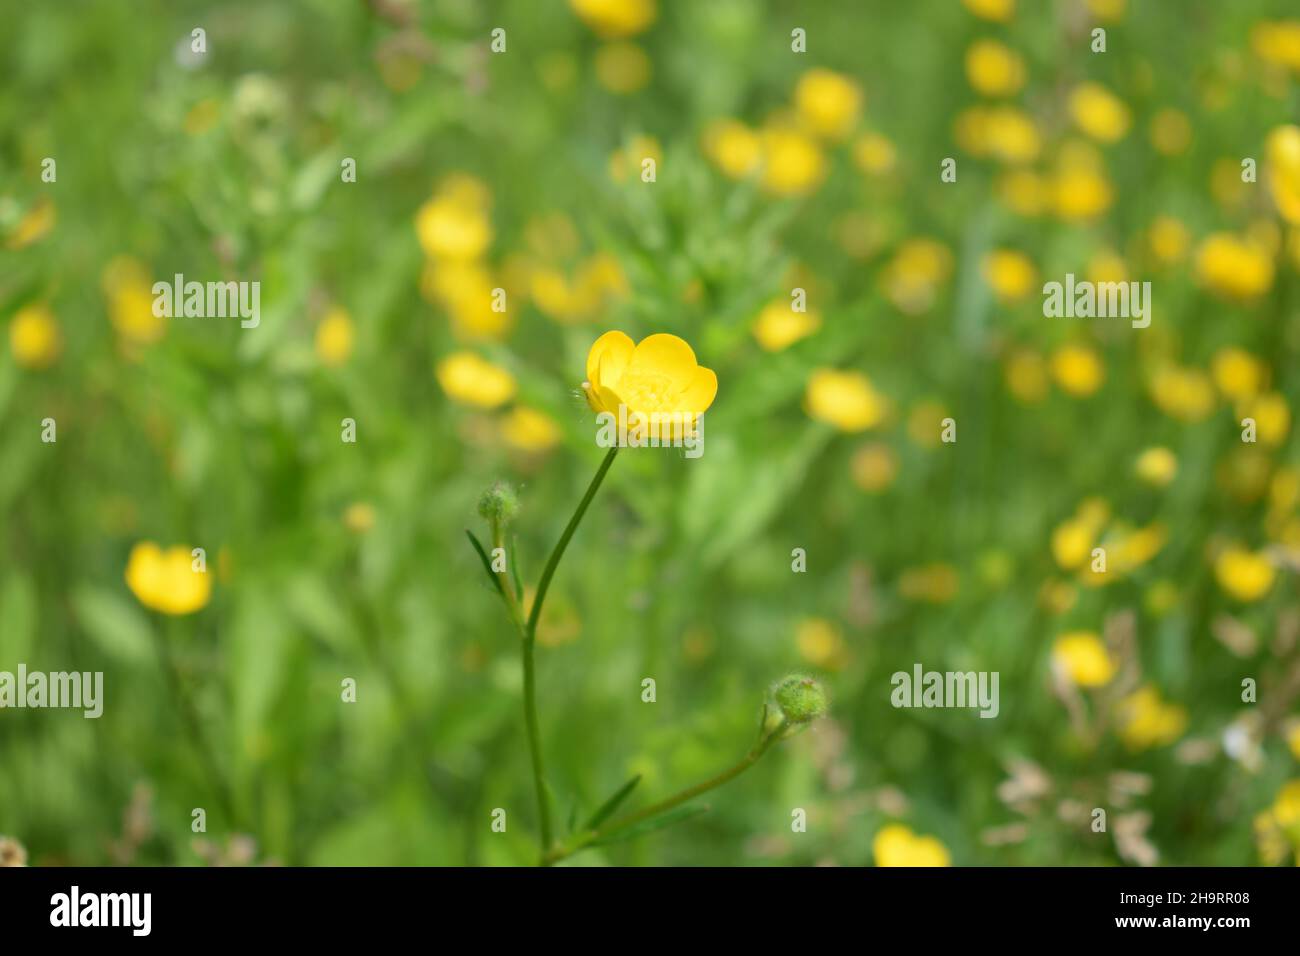 Selective focus shot of a creeping crowfoot flower blooming in the meadow Stock Photo